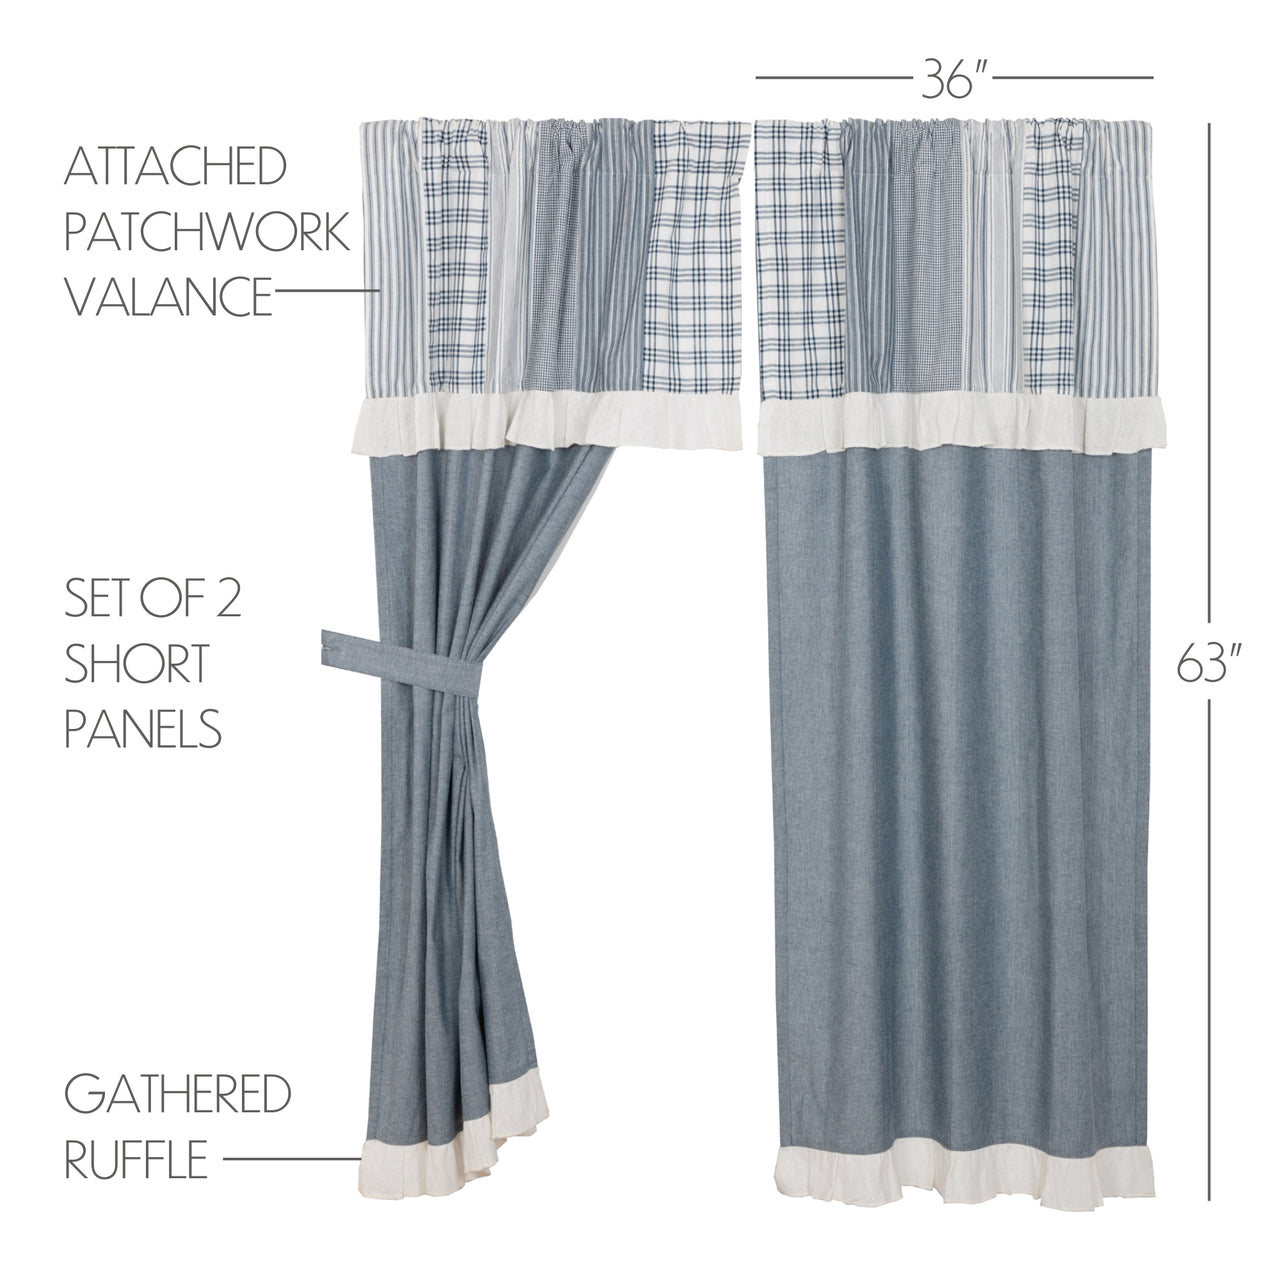 Sawyer Mill Blue Short Panel Curtain with Attached Patchwork Valance Set of 2 36"x63"